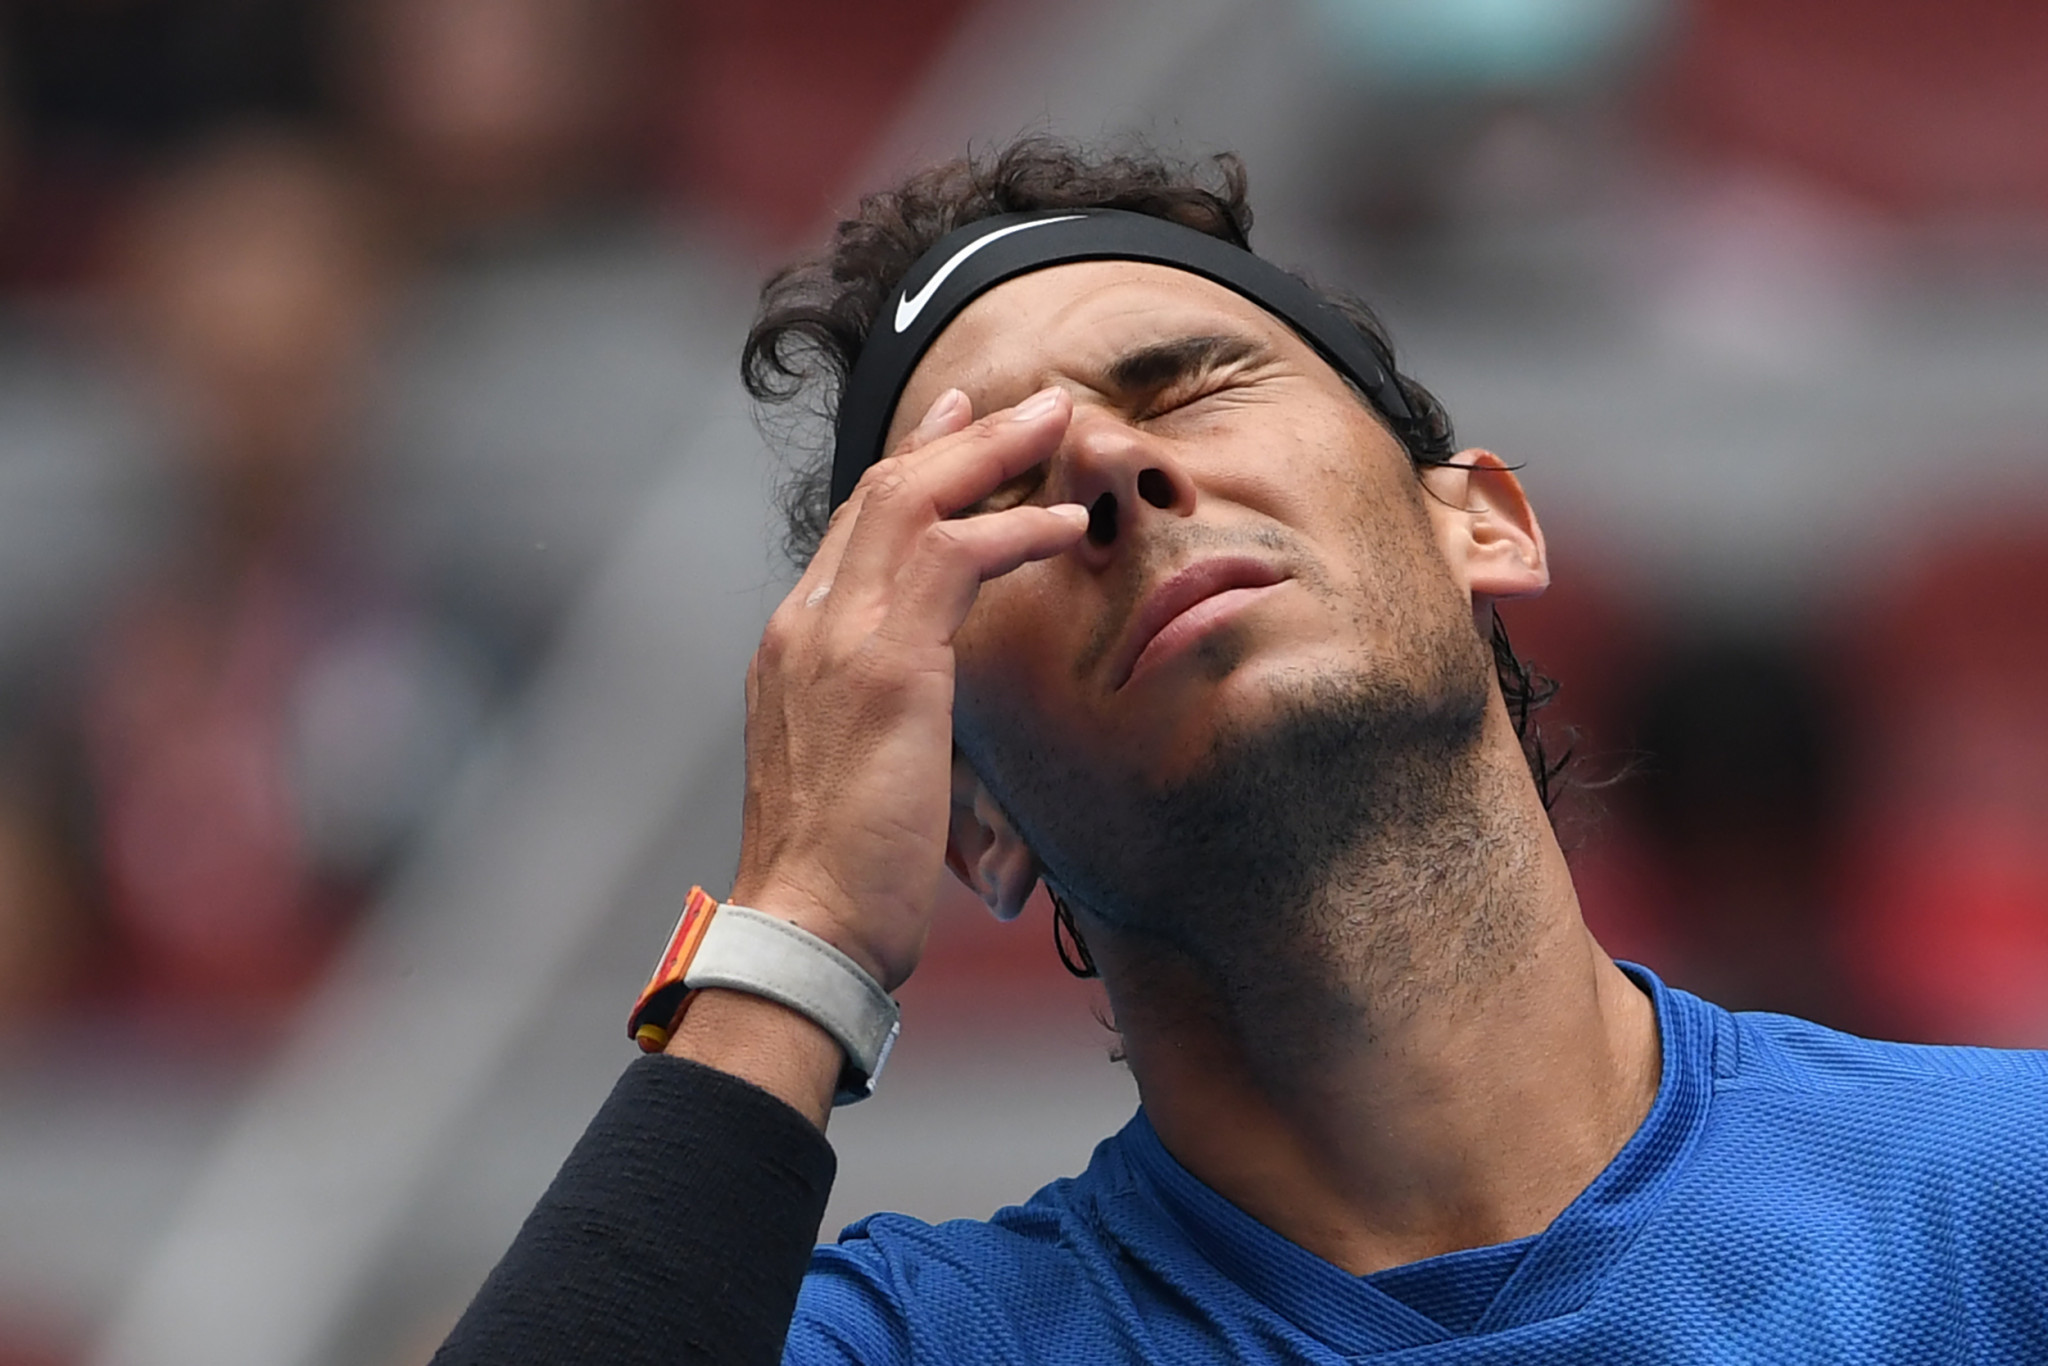 World number one Rafael Nadal overcame an eye injury to move into the semi-finals of the China Open with a straight-sets win over American John Isner ©Getty Images